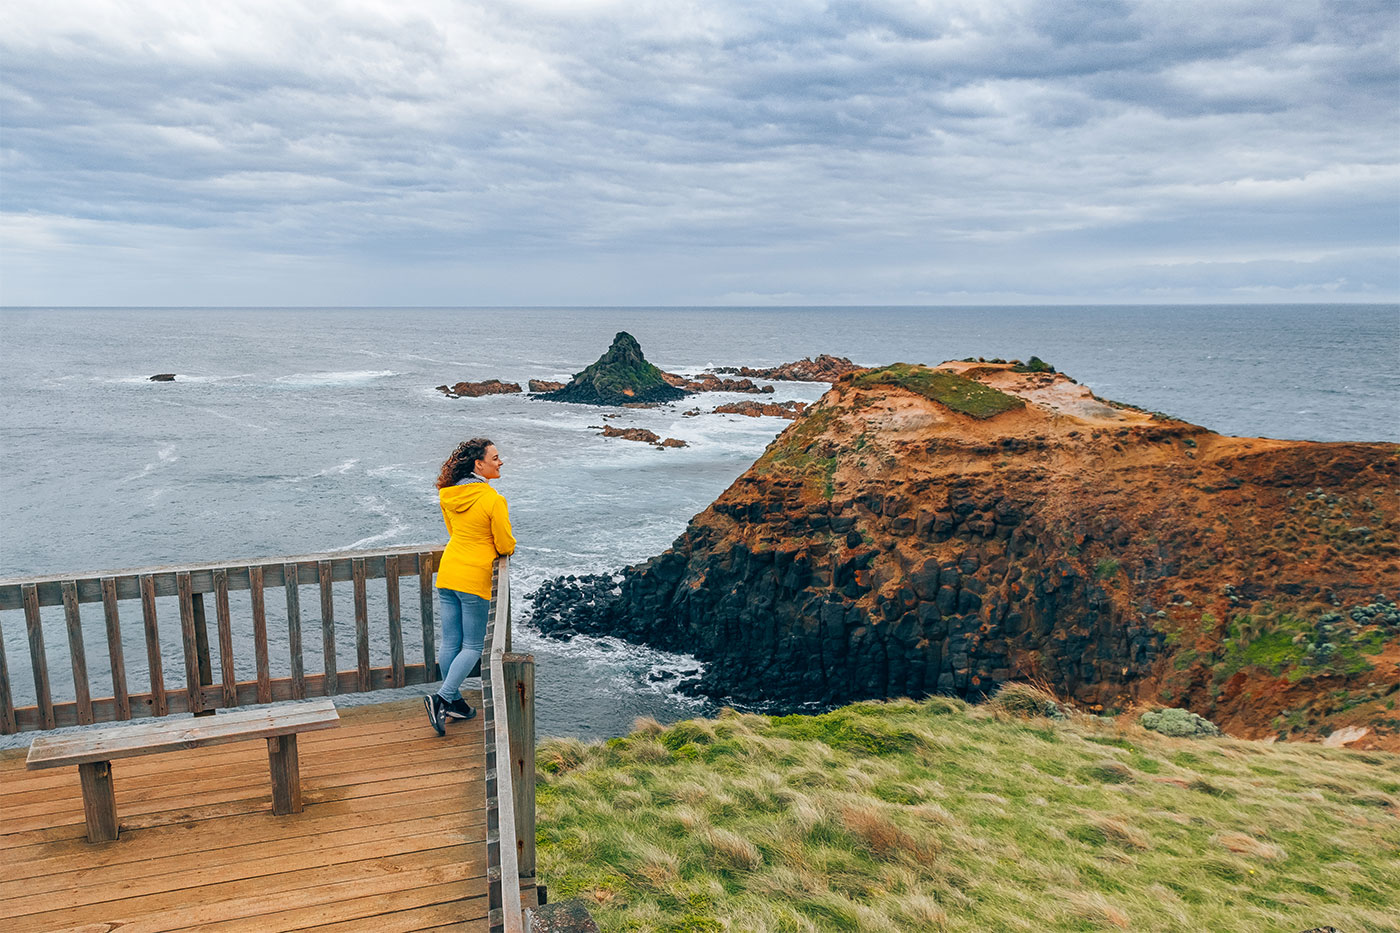 23 Best things to do in Phillip Island, Australia - Where to stay, how to get their, itinerary, travel tips